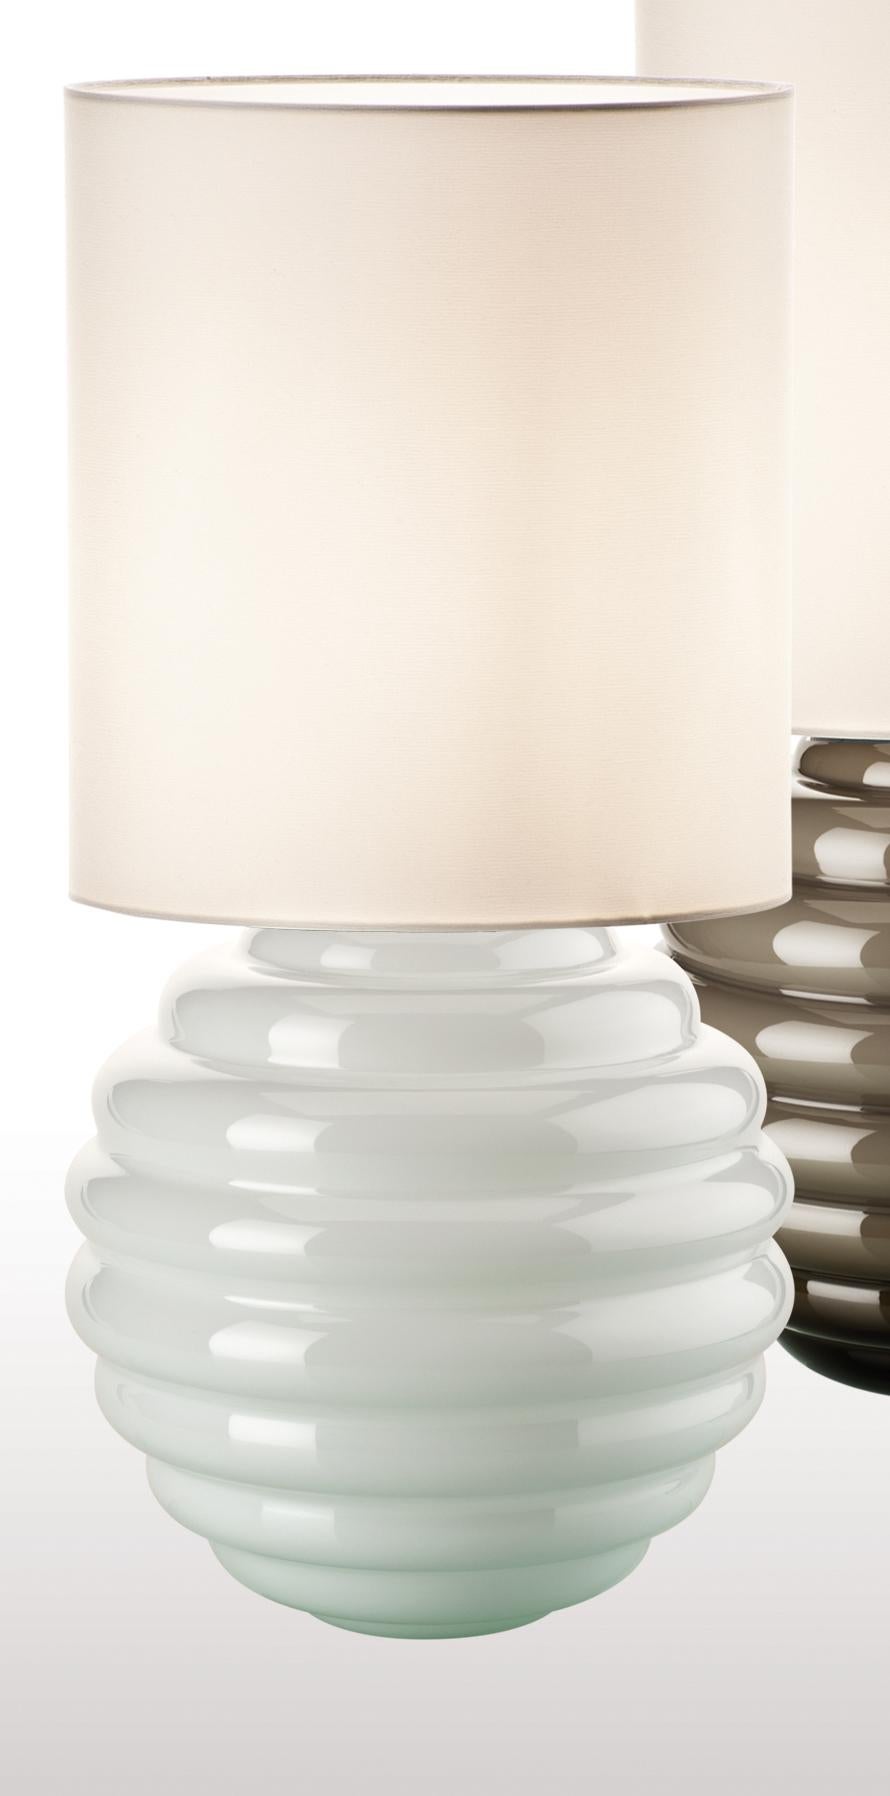 Deco table lamp in glass with a white fabric shade. Its body's rippled shape make it an interesting addition to any living room, office or bedroom space. Also available in other colors.

Light source: One max 105 E27. Dimensions: 30 cm diameter x